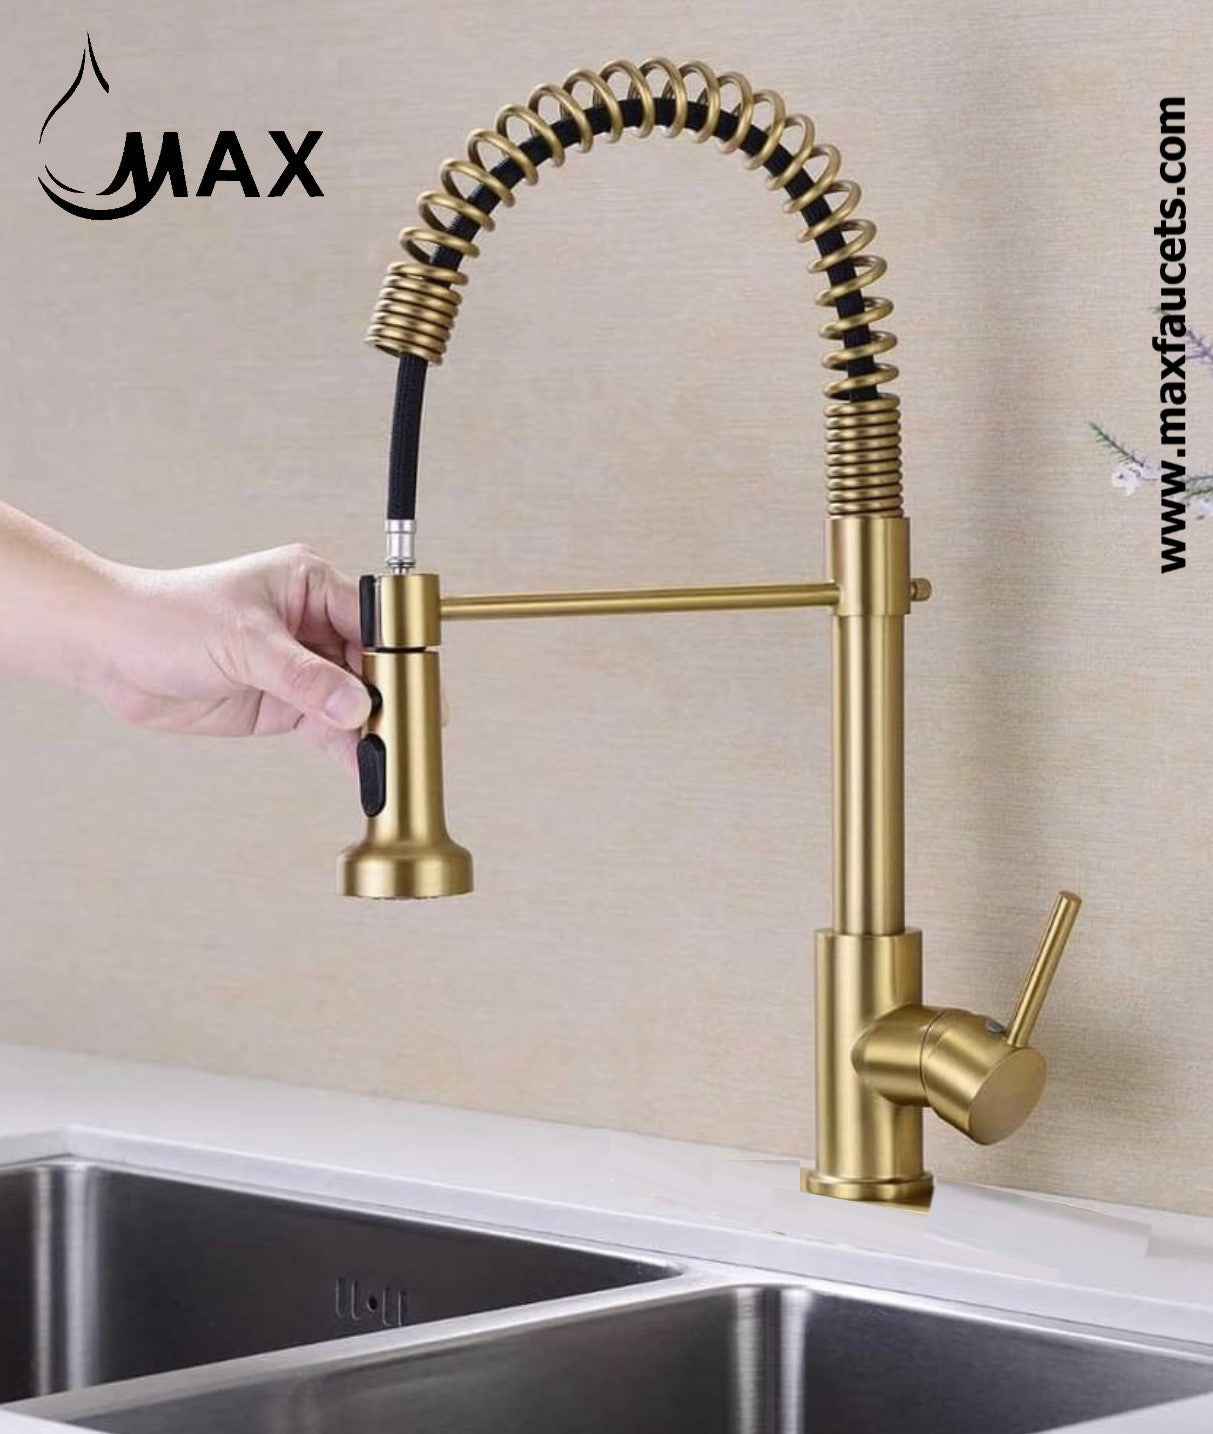 Load video: How To Install Flexible Pull-Down Kitchen Faucet